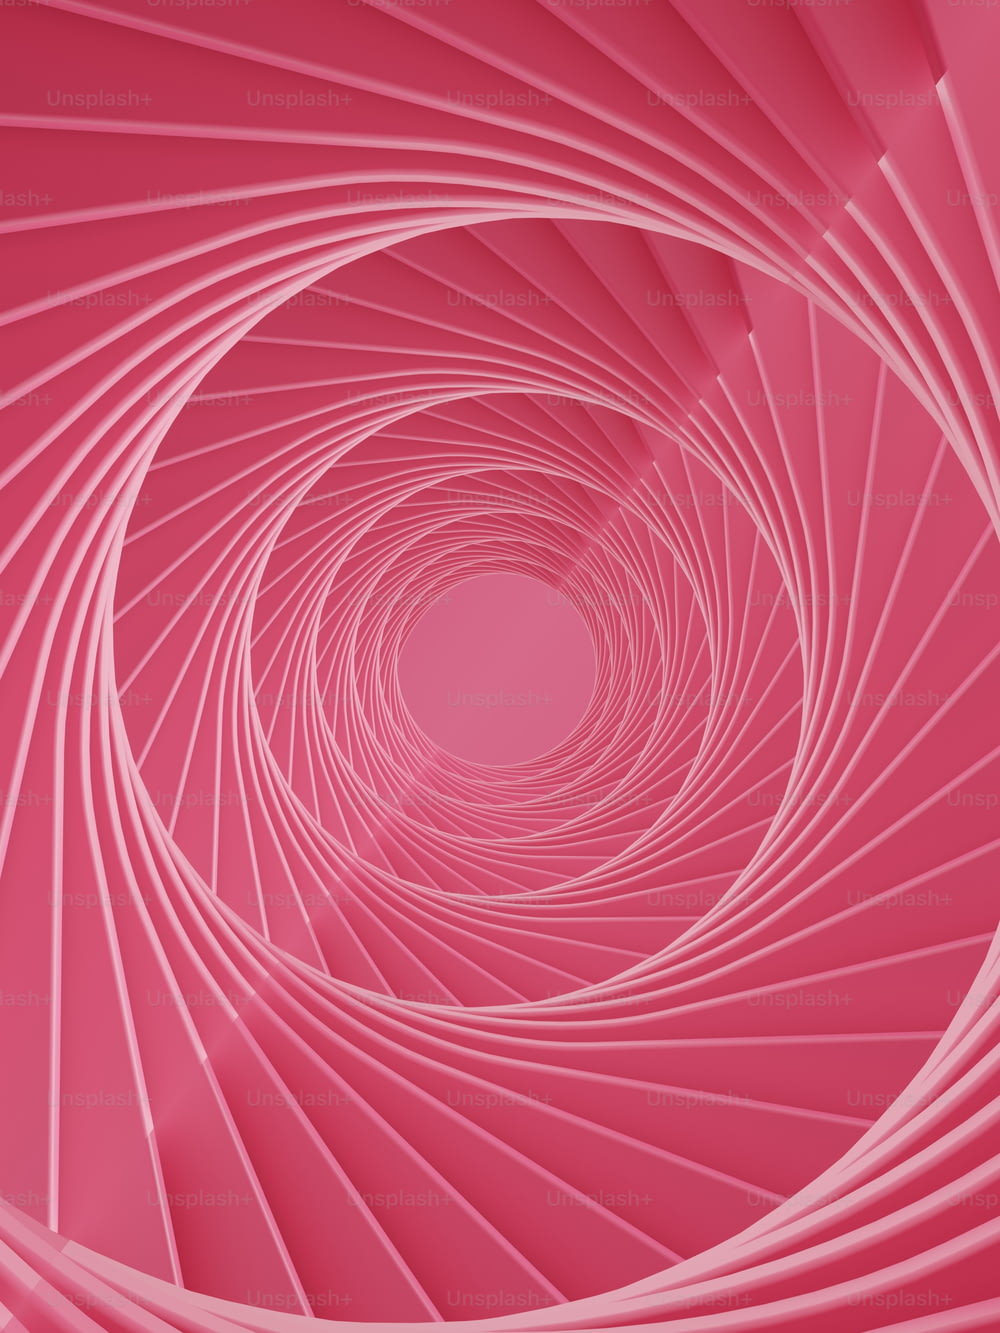 a pink background with a spiral design in the center